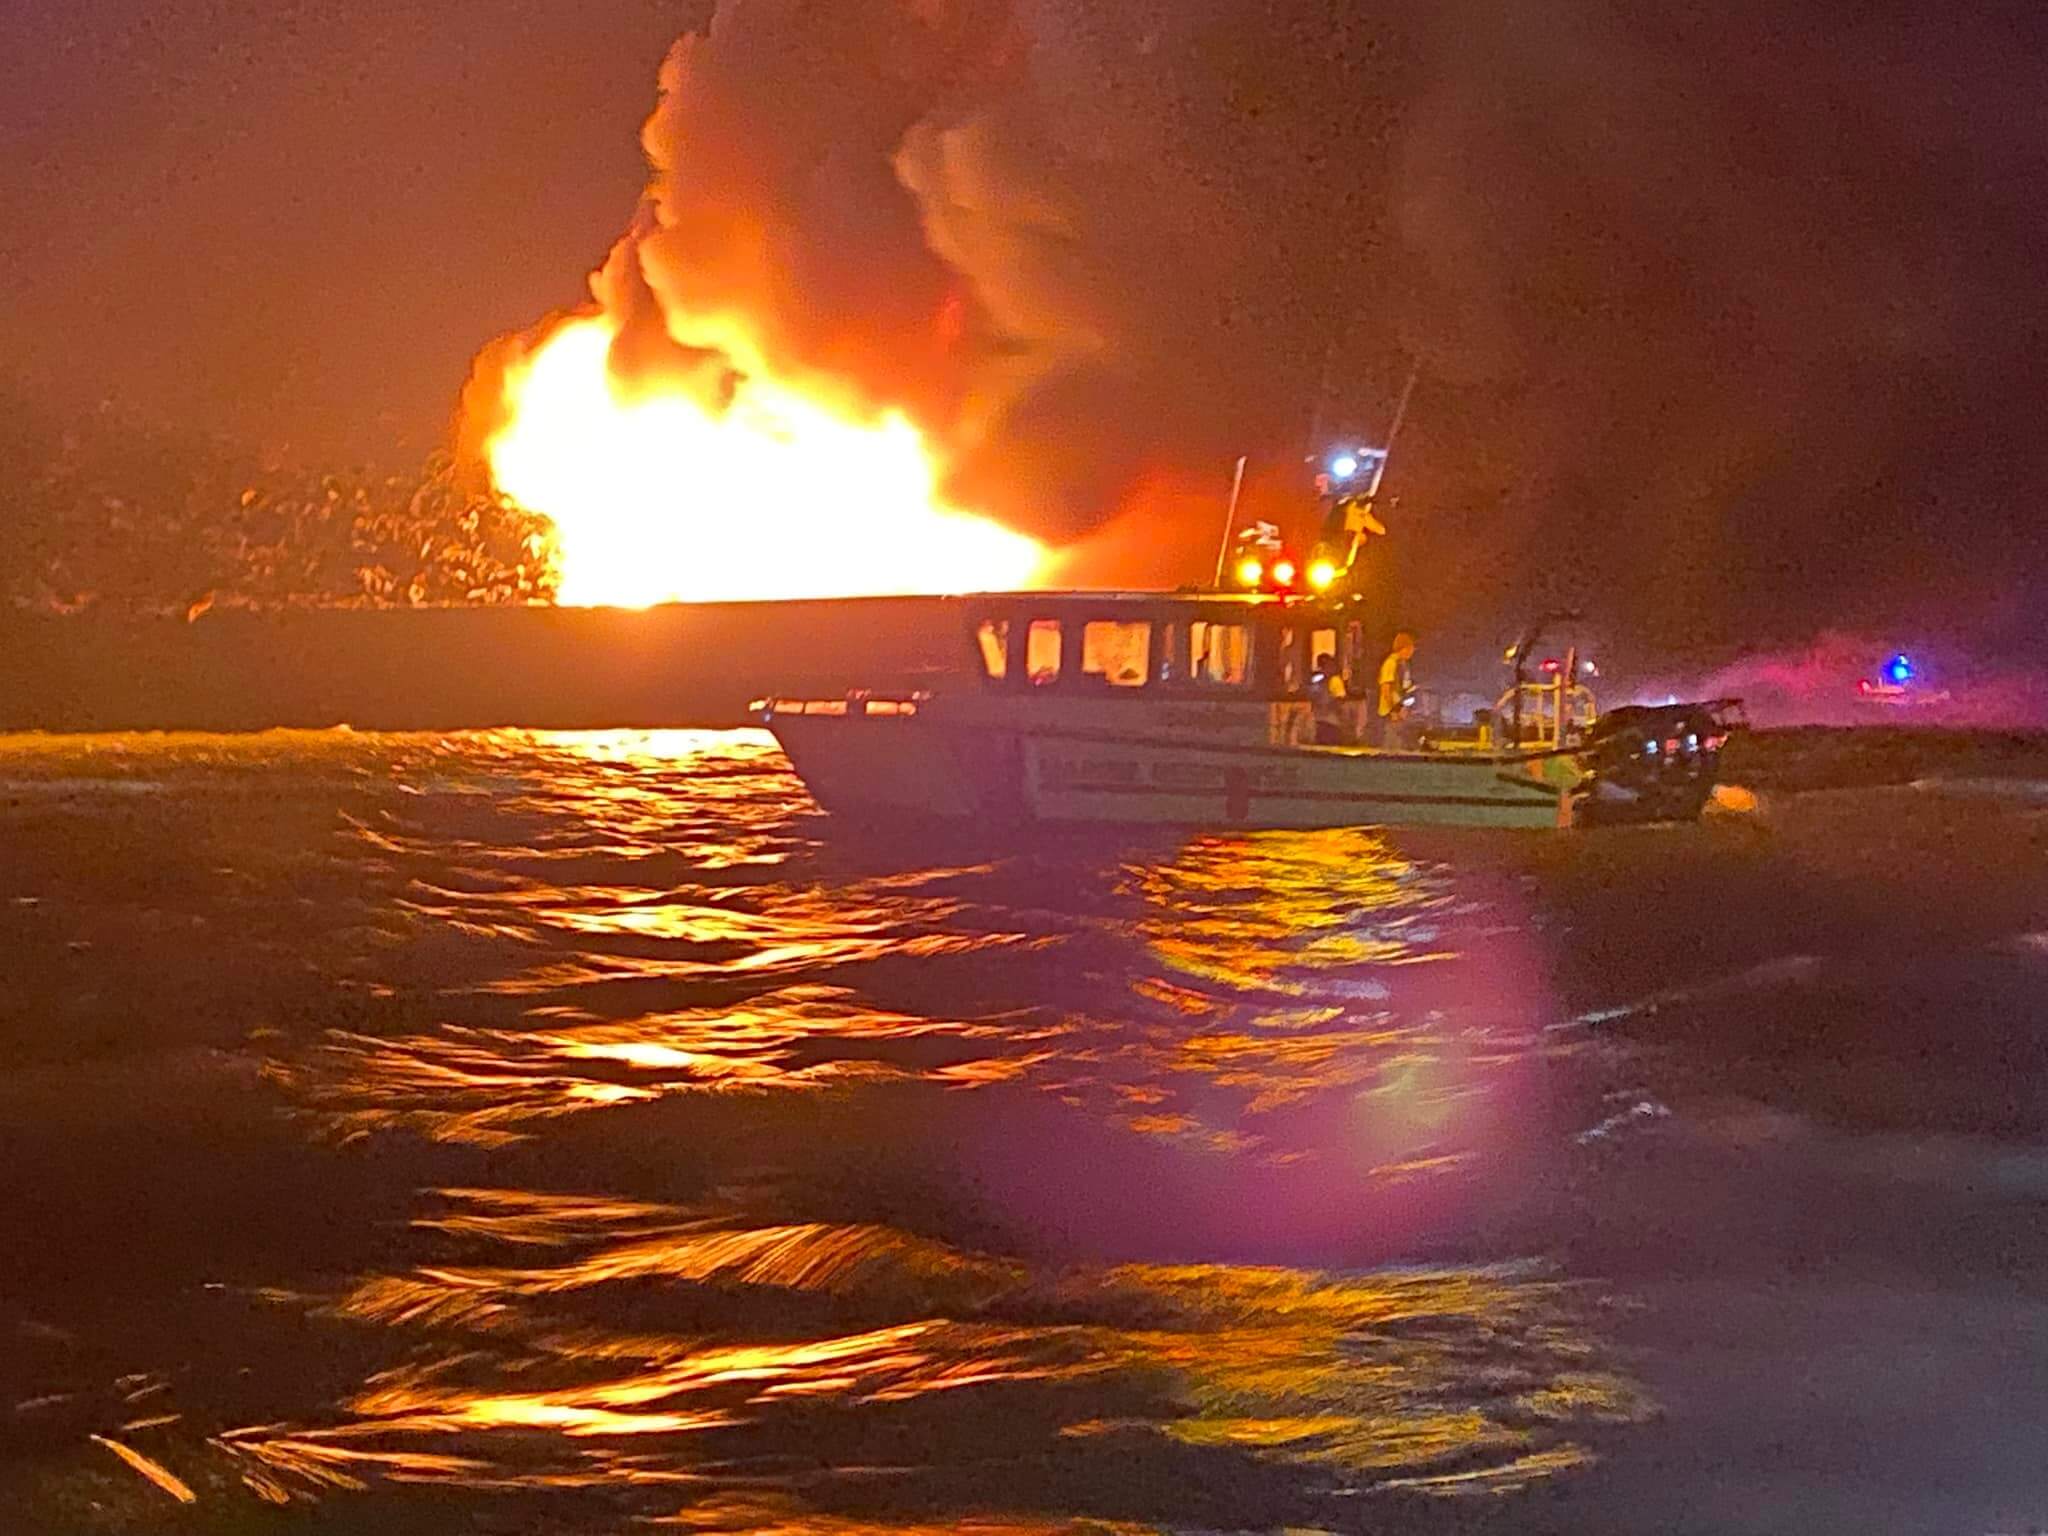 Photos: Deck Barge Catches Fire in Delaware River